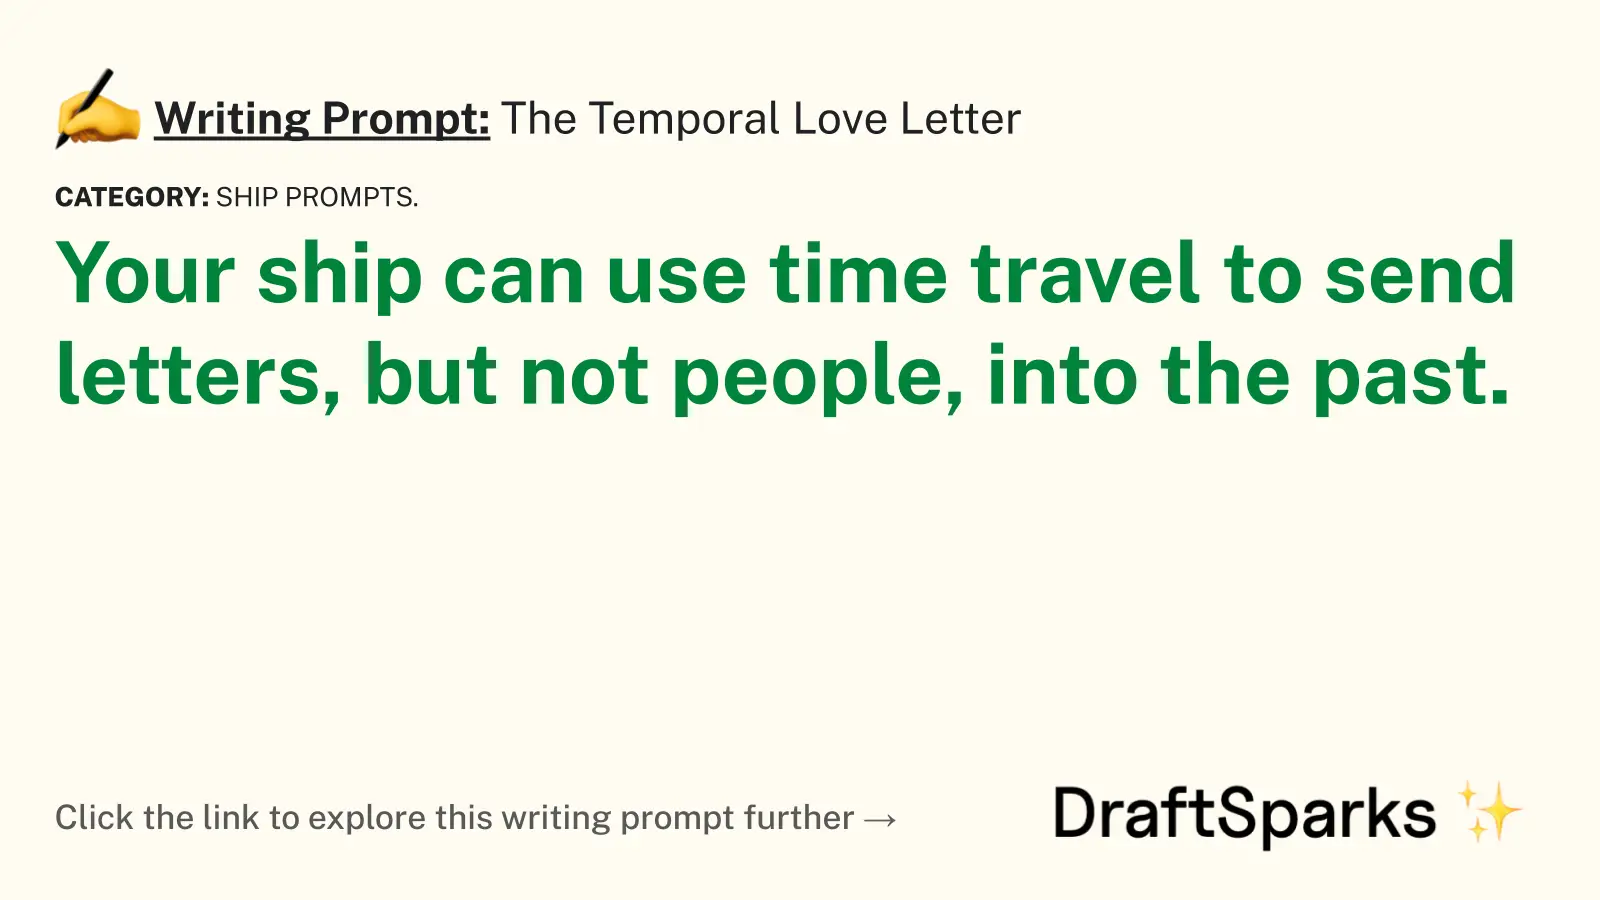 The Temporal Love Letter